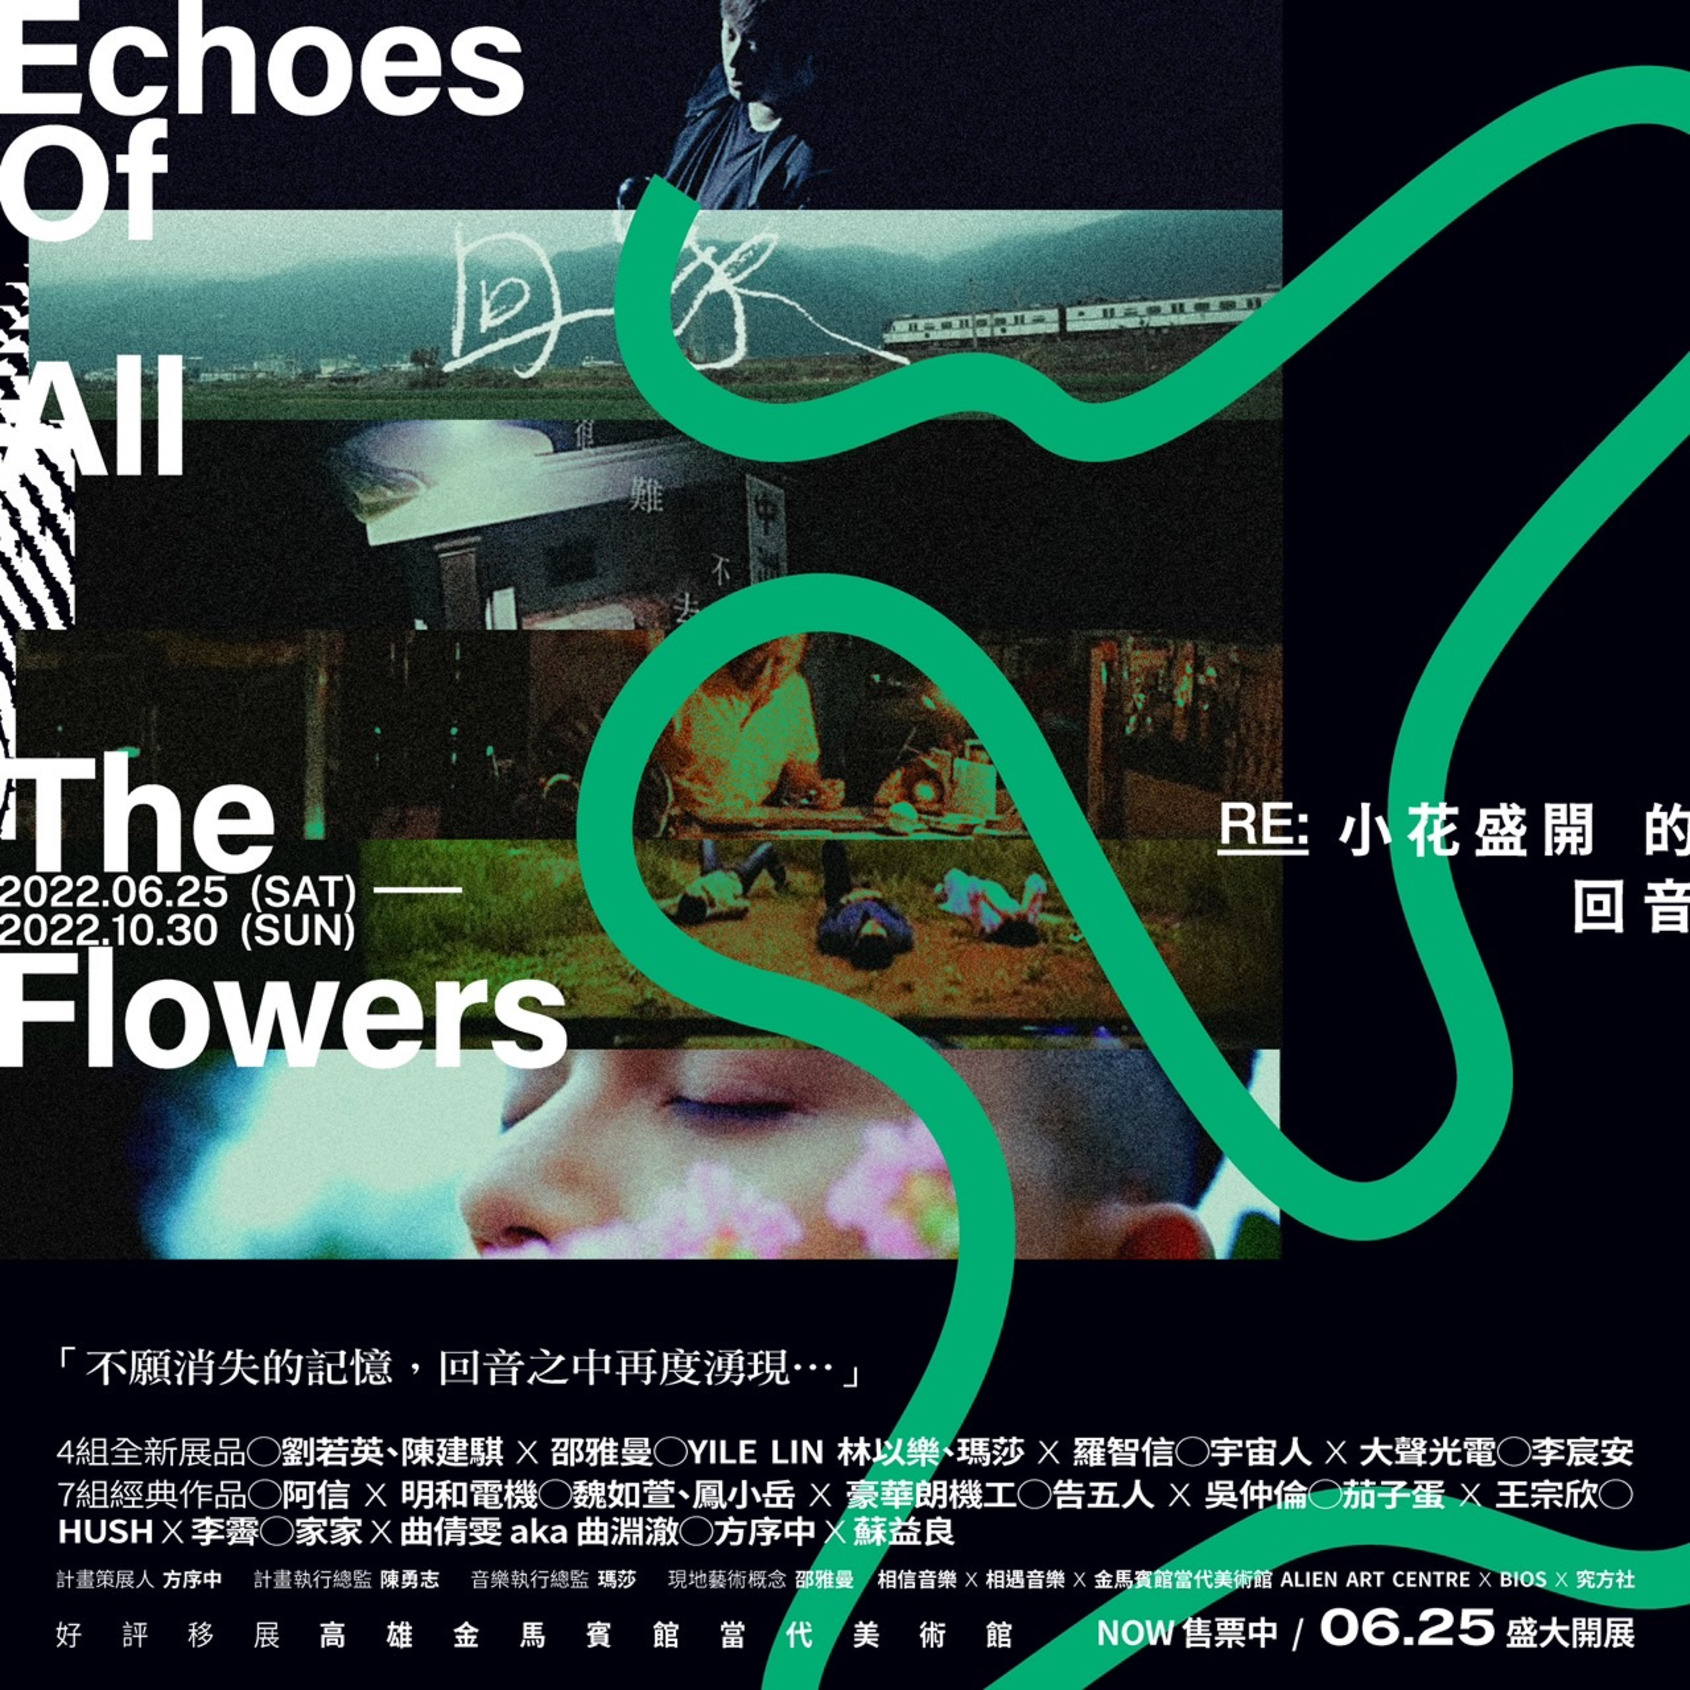  Key Visual of Echoes of All The Flowers